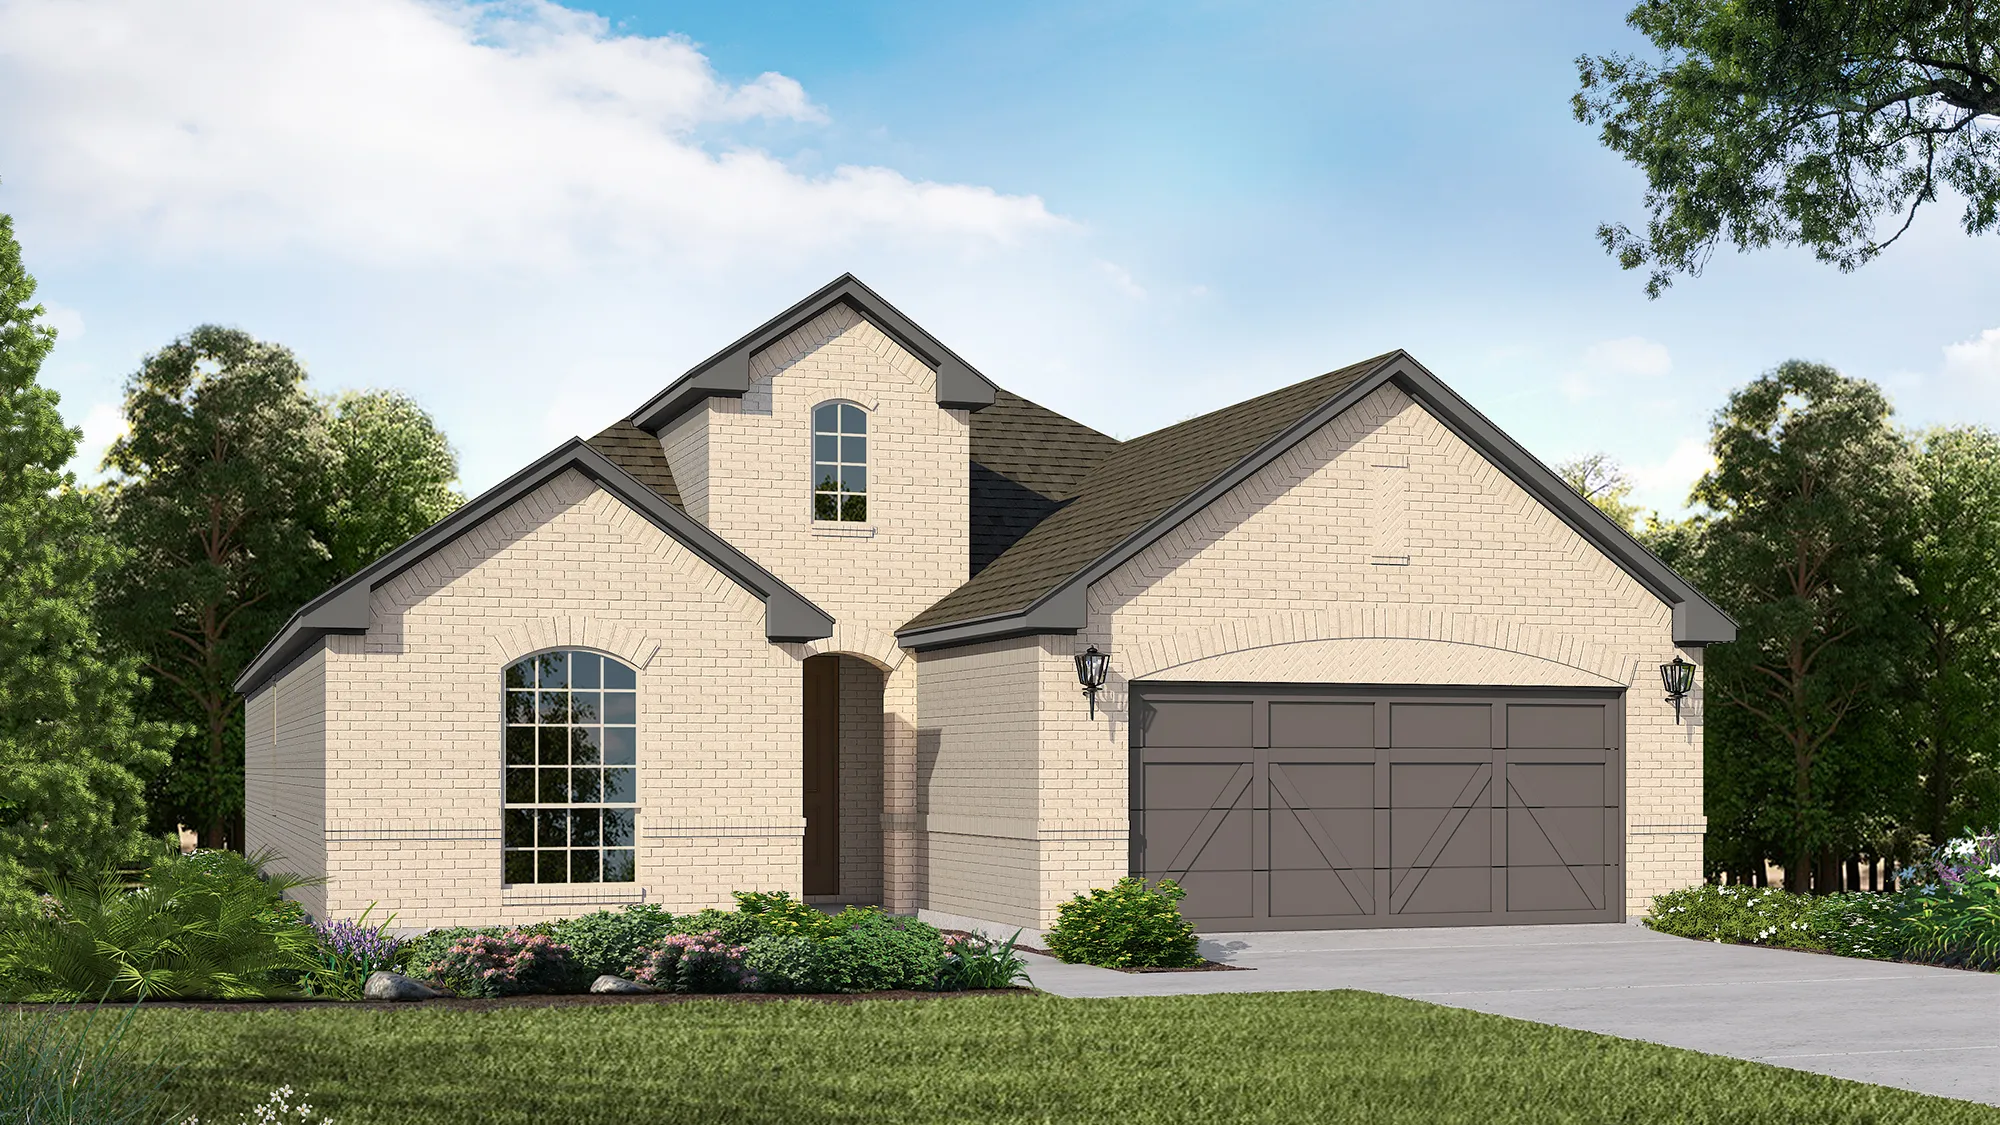 Plan 1520 Elevation A by American Legend Homes